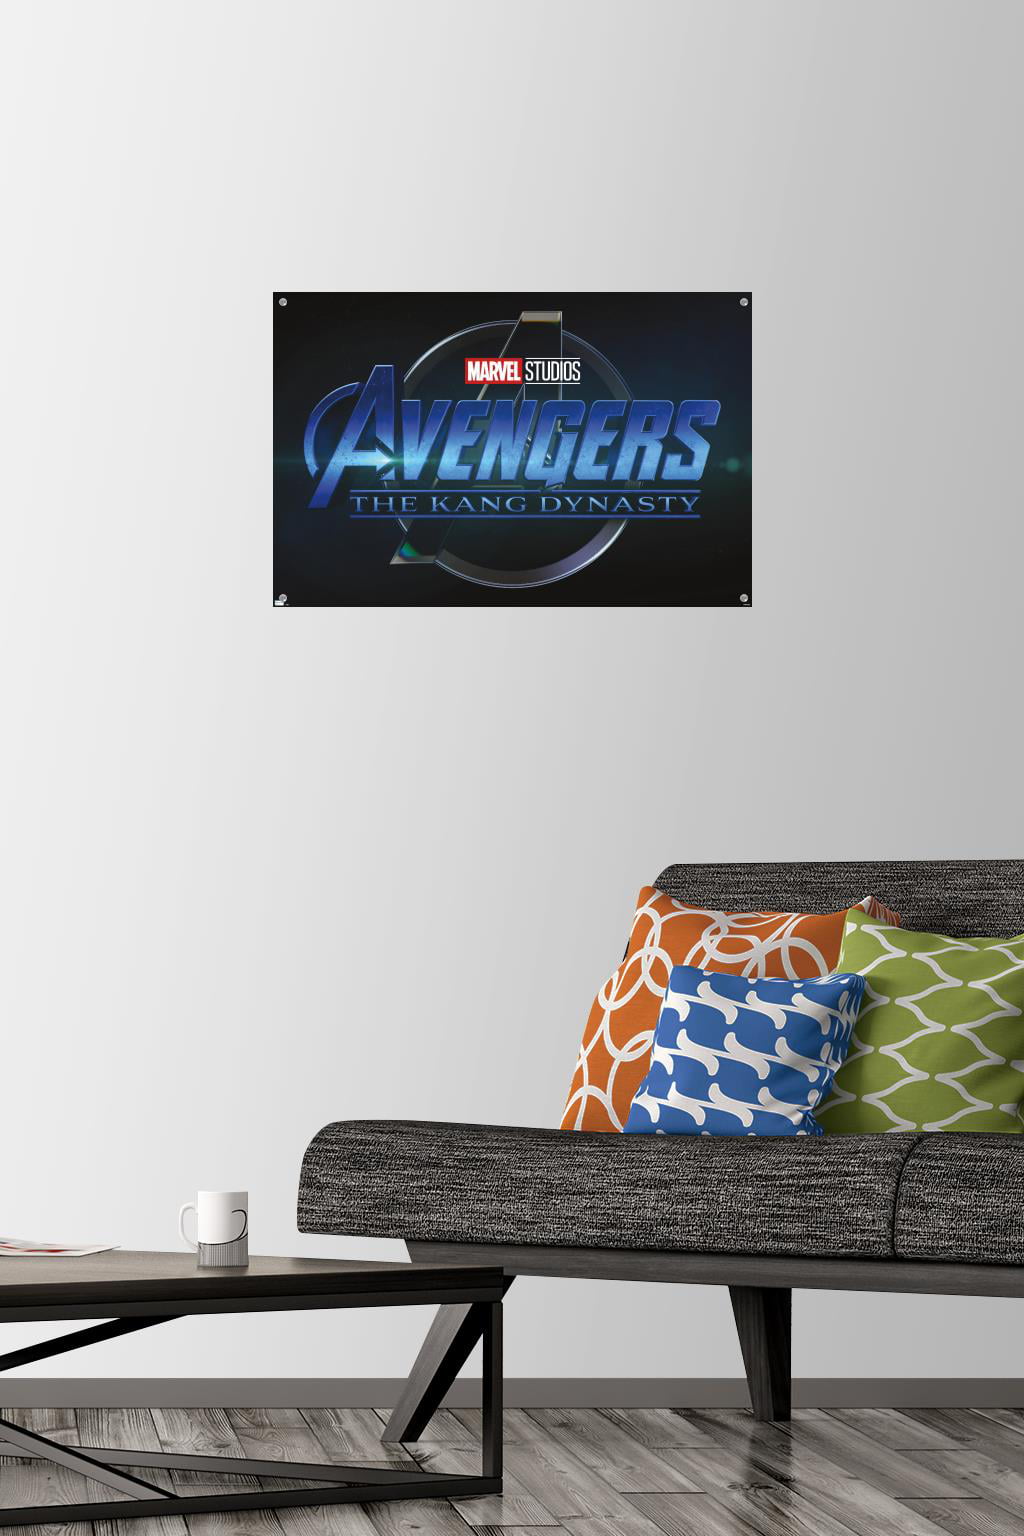  Avengers The Kang Dynasty Movie Poster 1 Canvas Art Poster  and Wall Art Picture Print Modern Family Bedroom Decor Poster  Unframe-style24x36inch (60x90cm) : Home & Kitchen